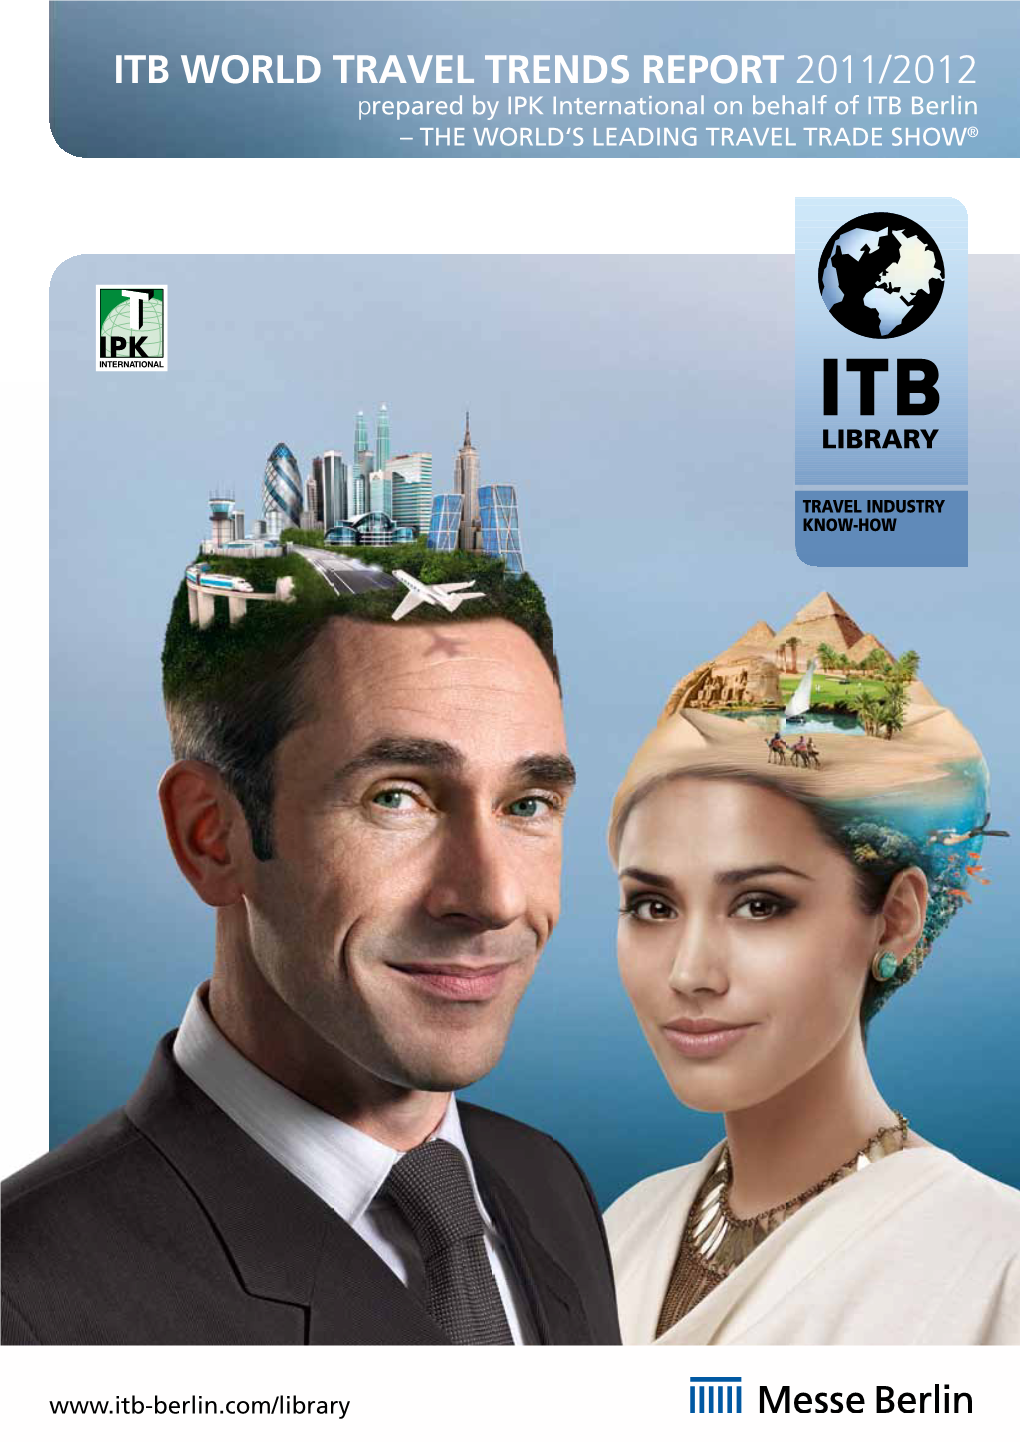 ITB WORLD TRAVEL TRENDS REPORT 2011/2012 Prepared by IPK International on Behalf of ITB Berlin – the WORLD‘S LEADING TRAVEL TRADE SHOW®